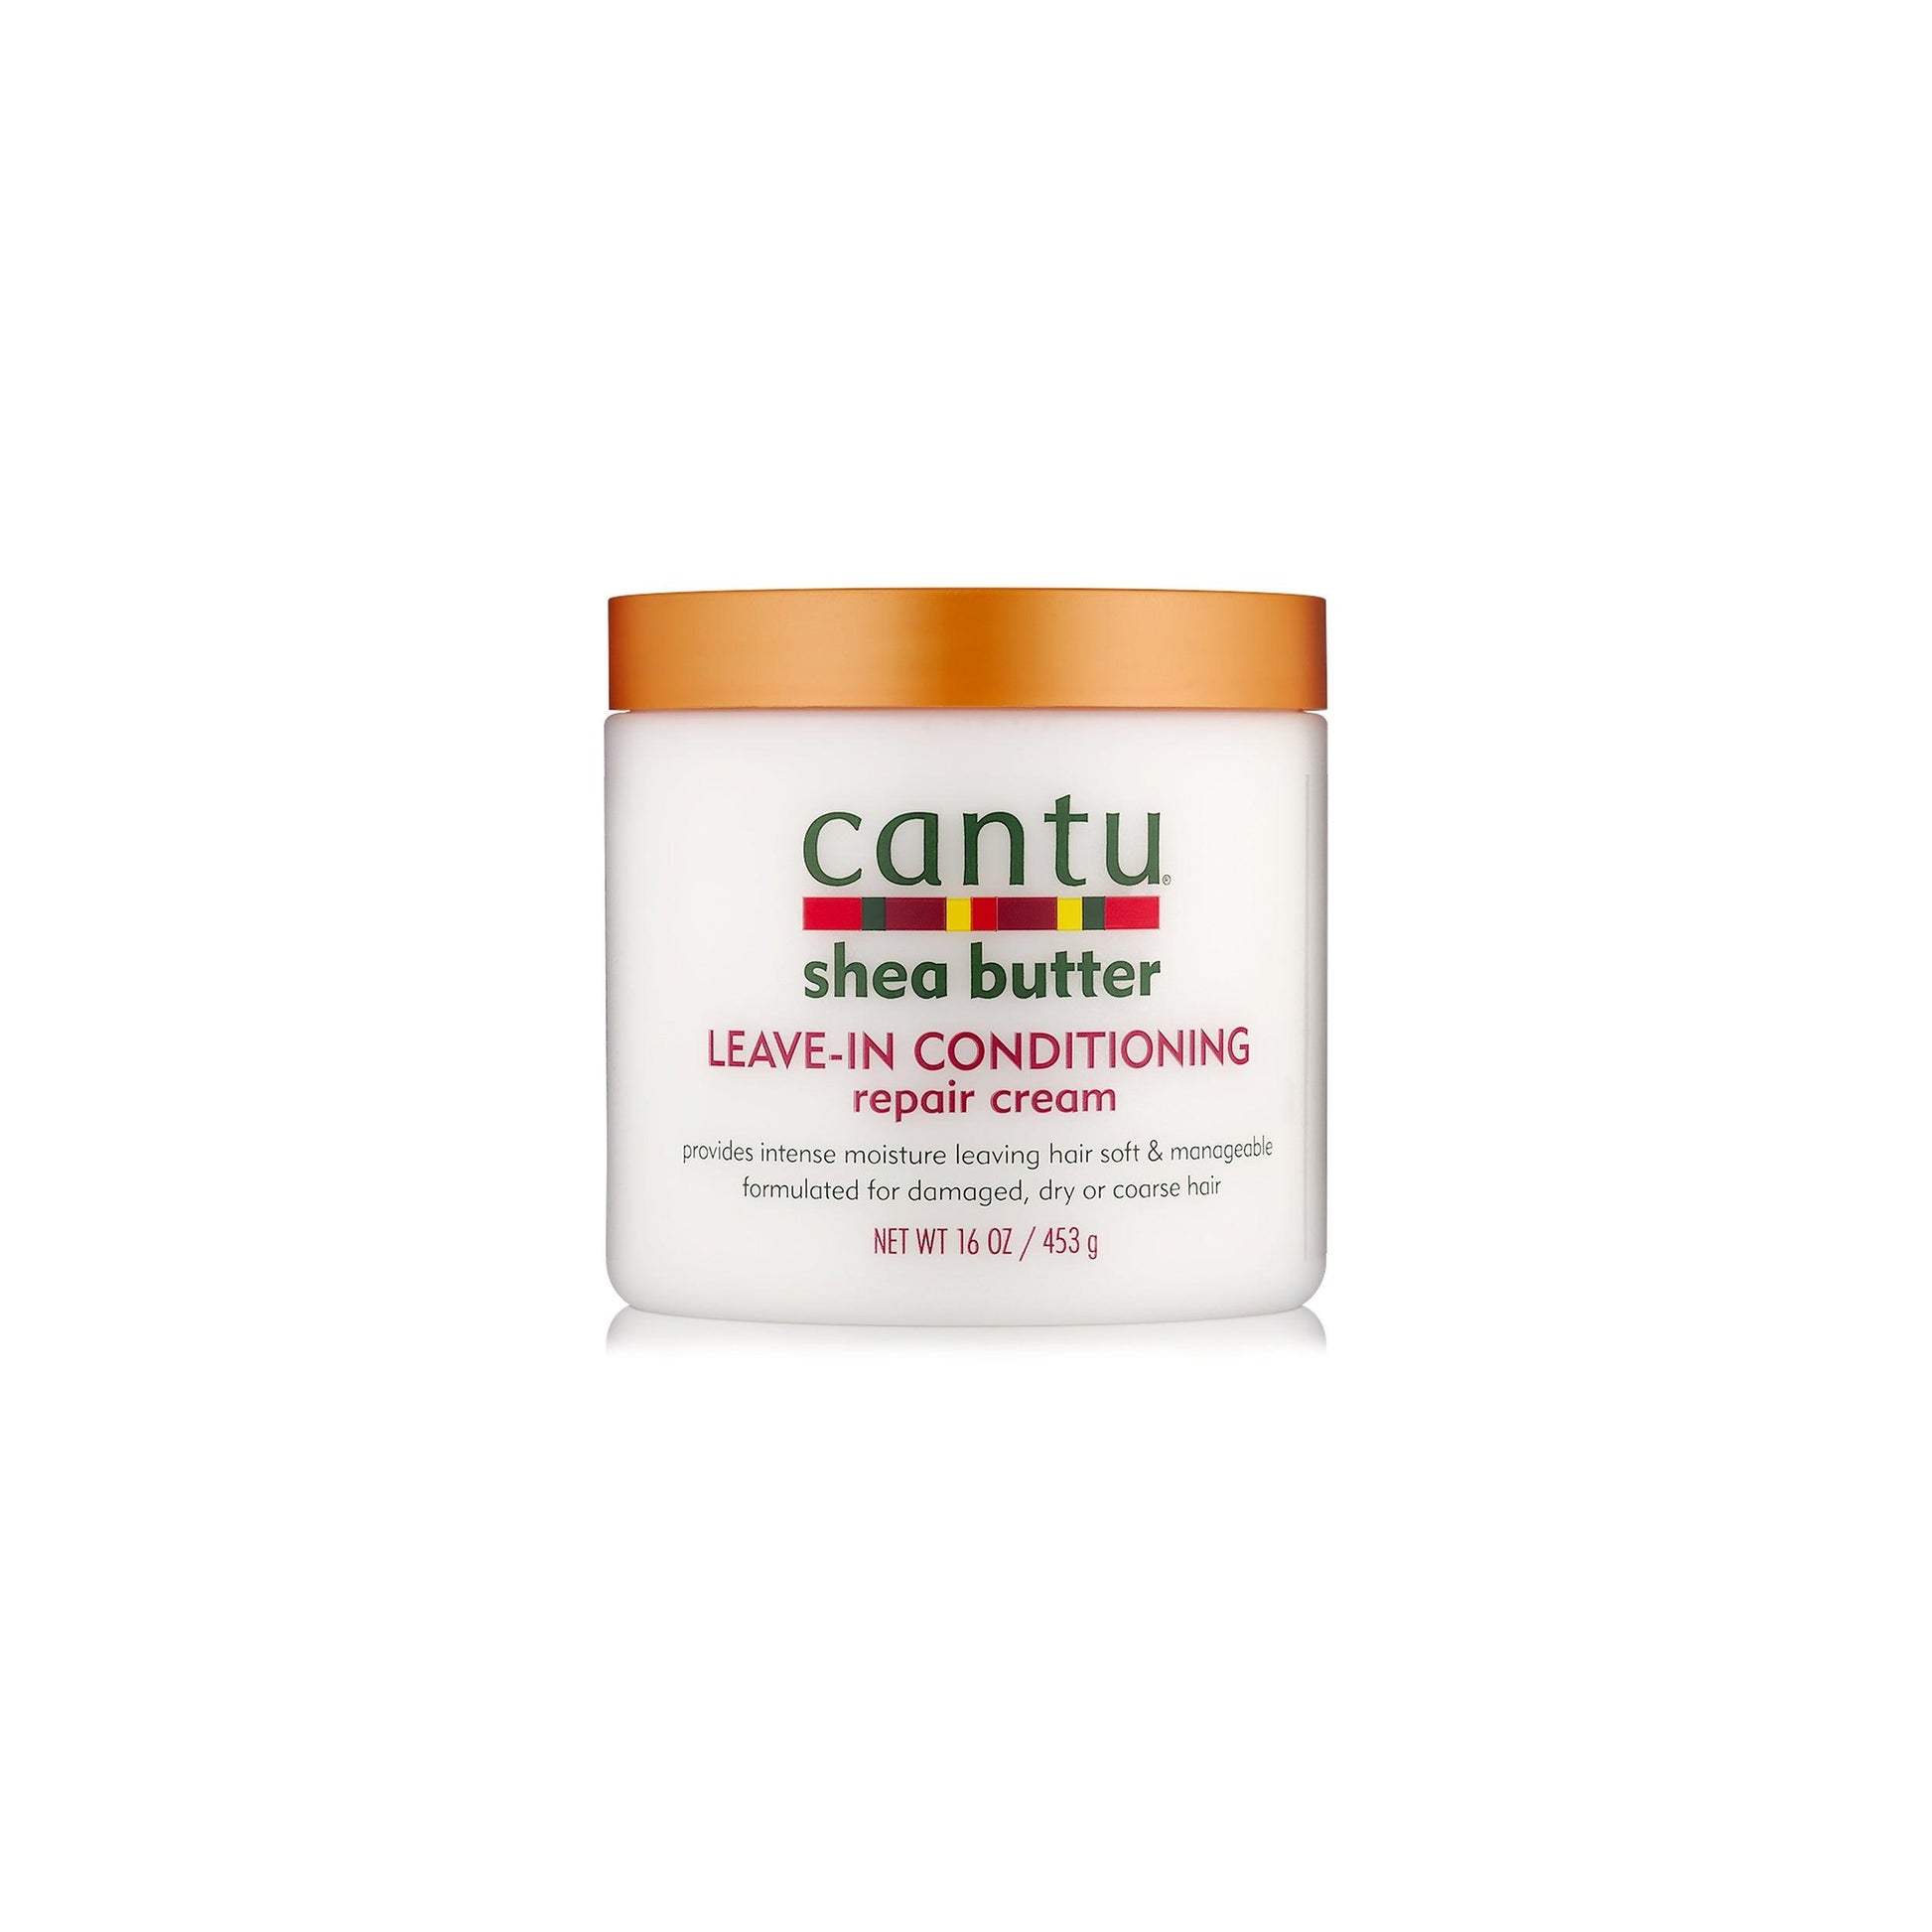 Cantu Shea Butter Leave-In Conditioning Repair Cream - Beauty Bounty